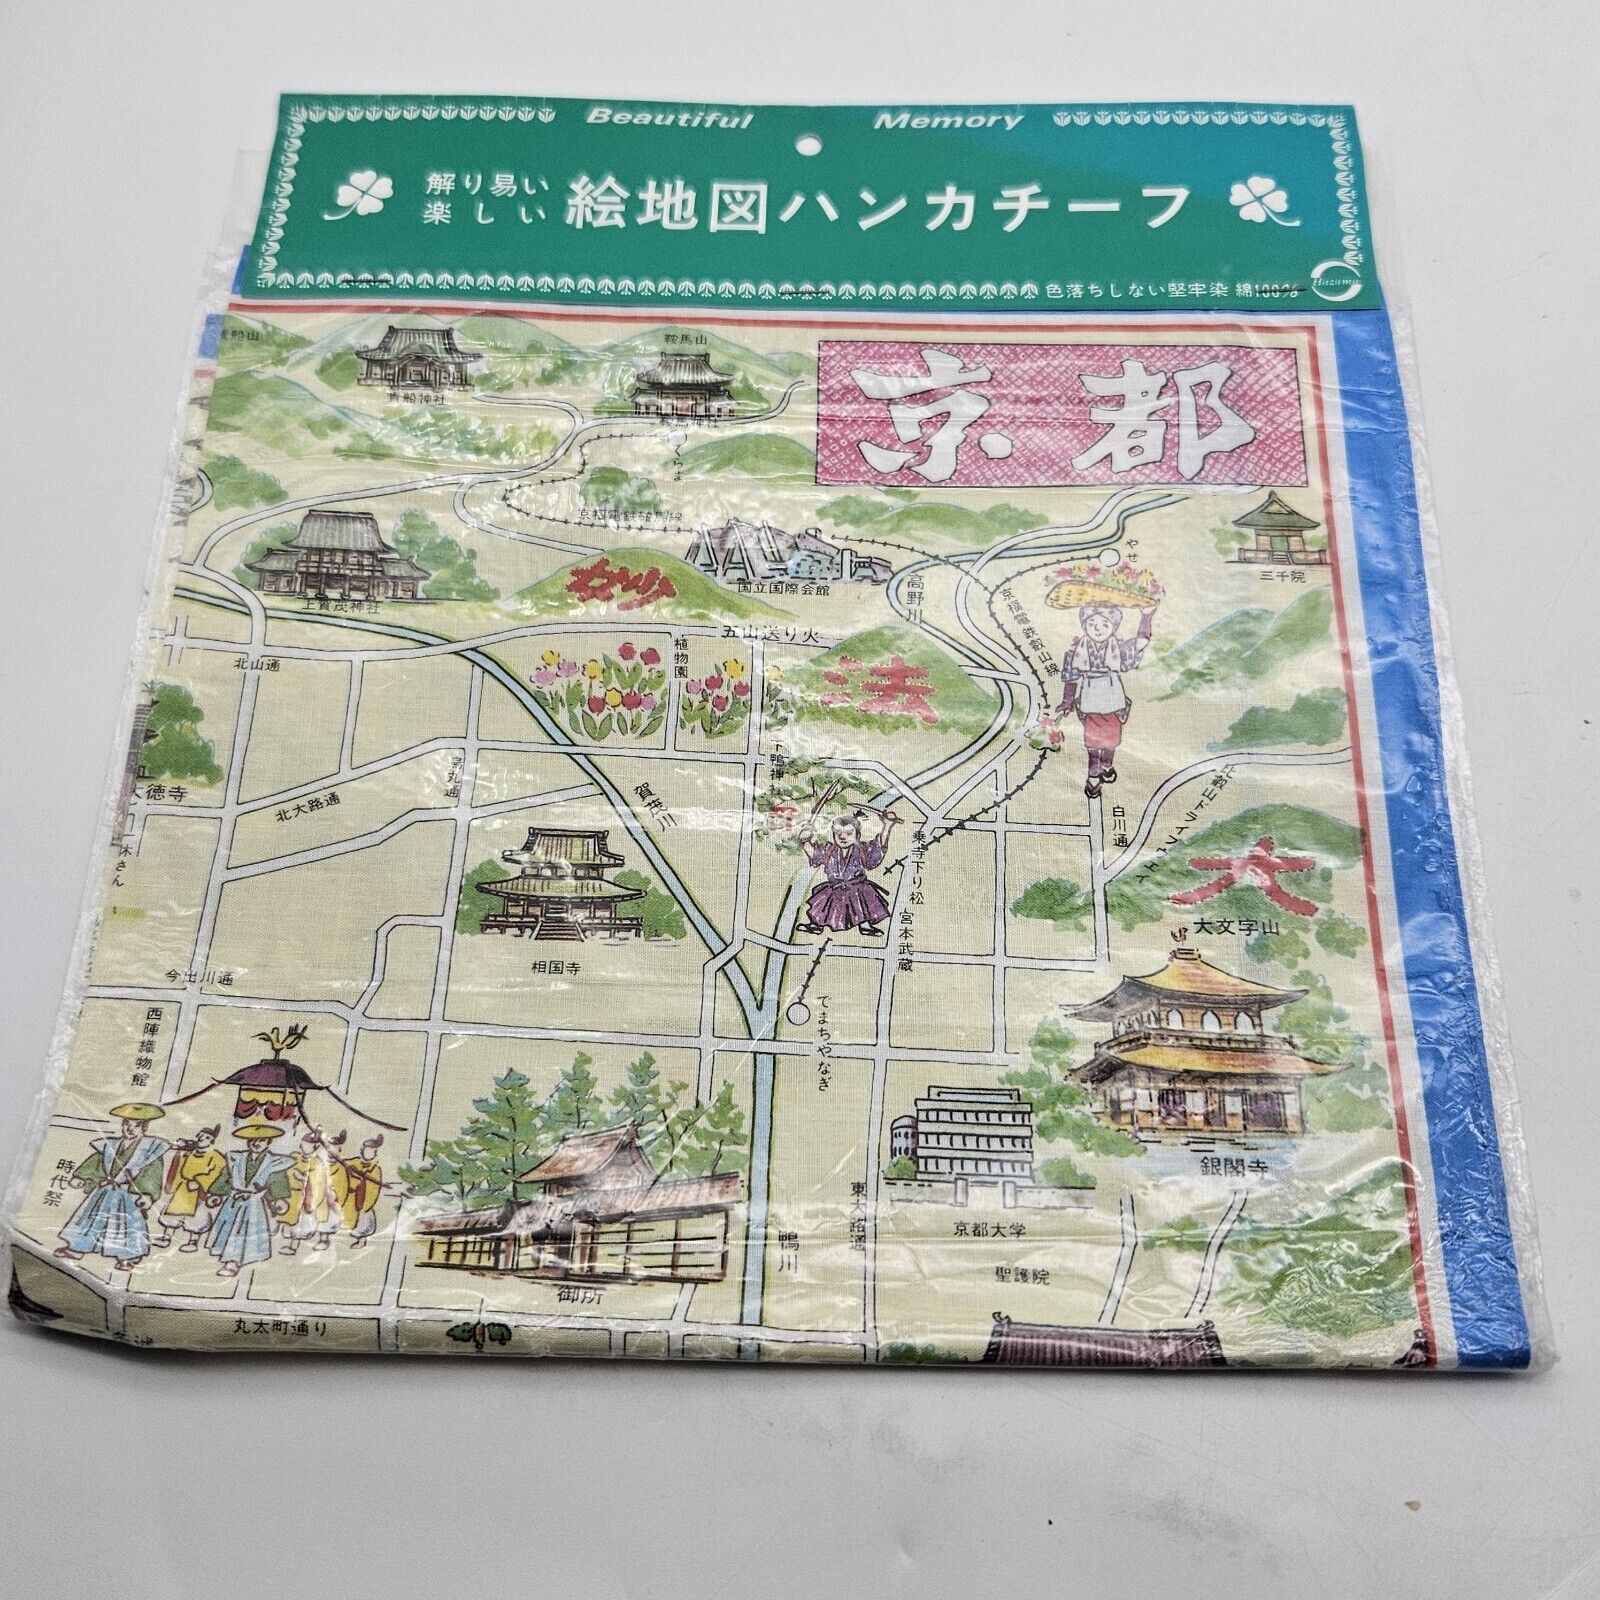 VTG KYOTO Japan Cotton TOURING MAP In JAPANESE. New, Sealed